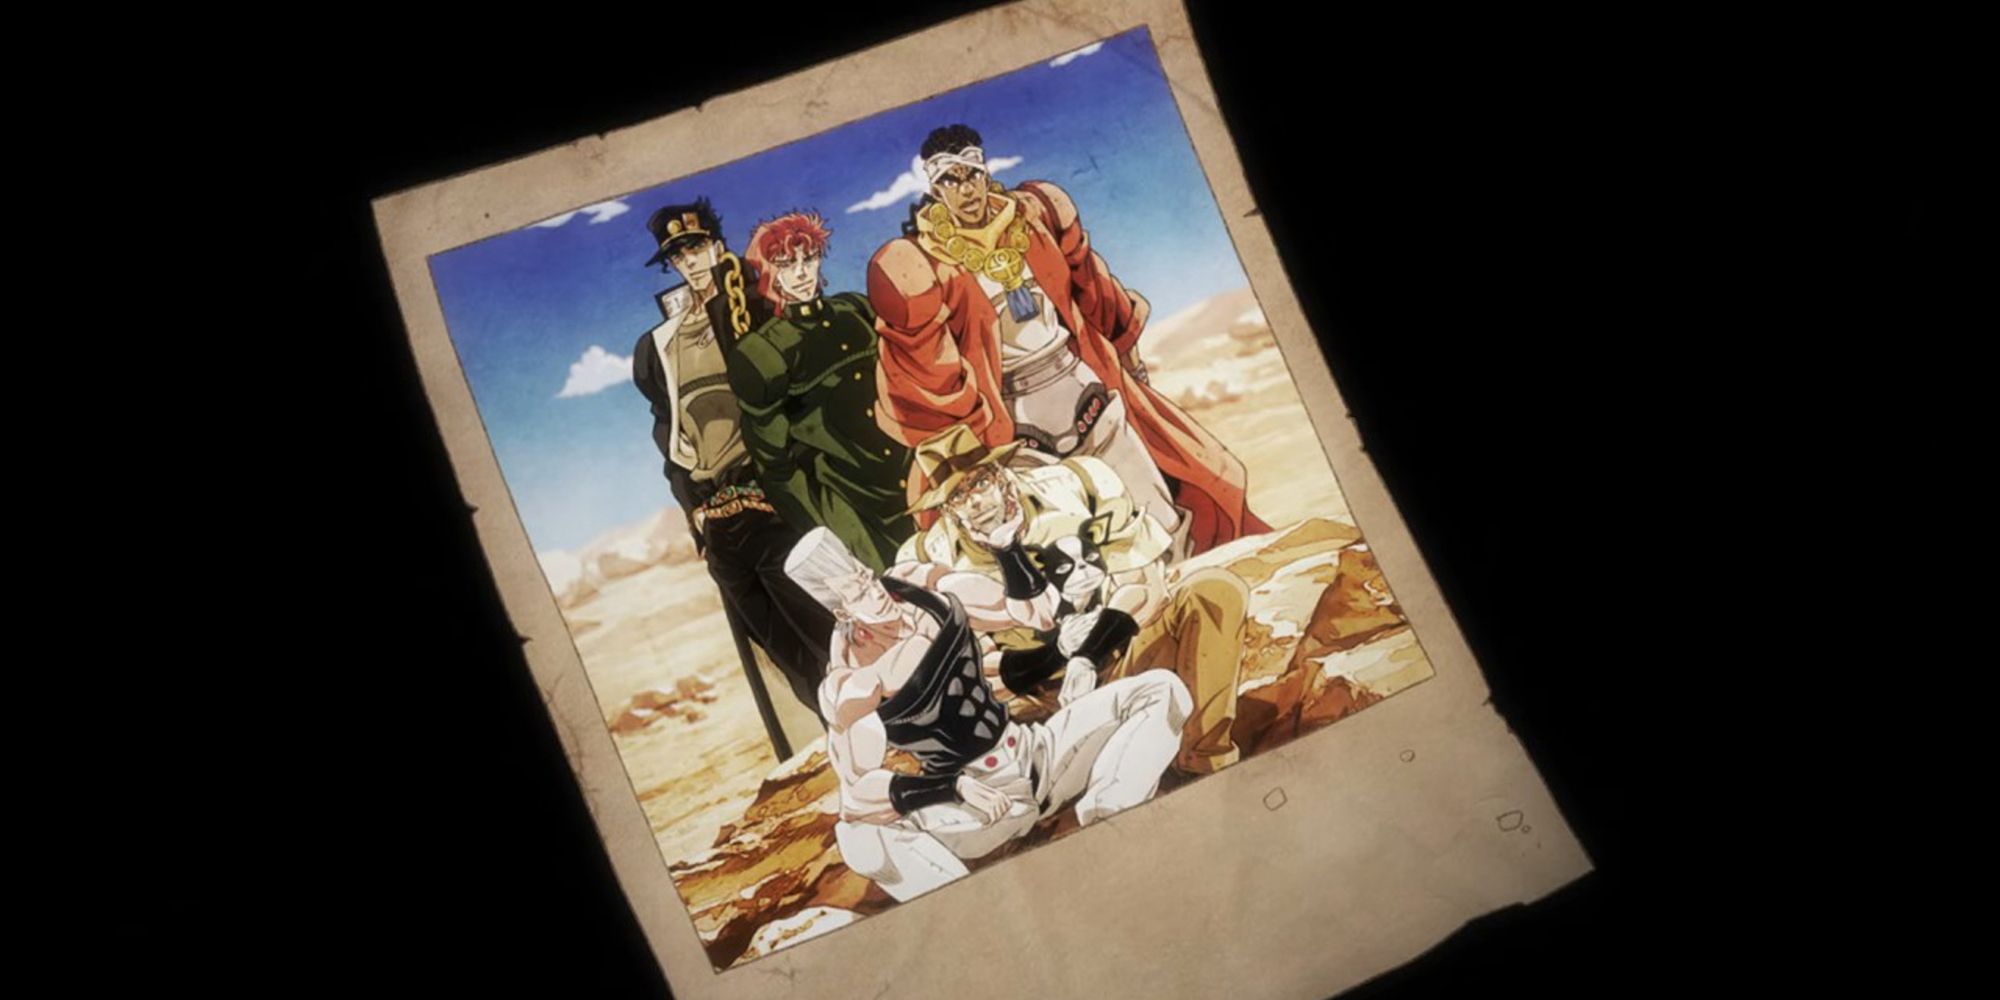 Jojo's Bizarre Adventure - Still Frame From Part 3 ED Last Train Home Of A Polaroid With The Whole Group Standing Together